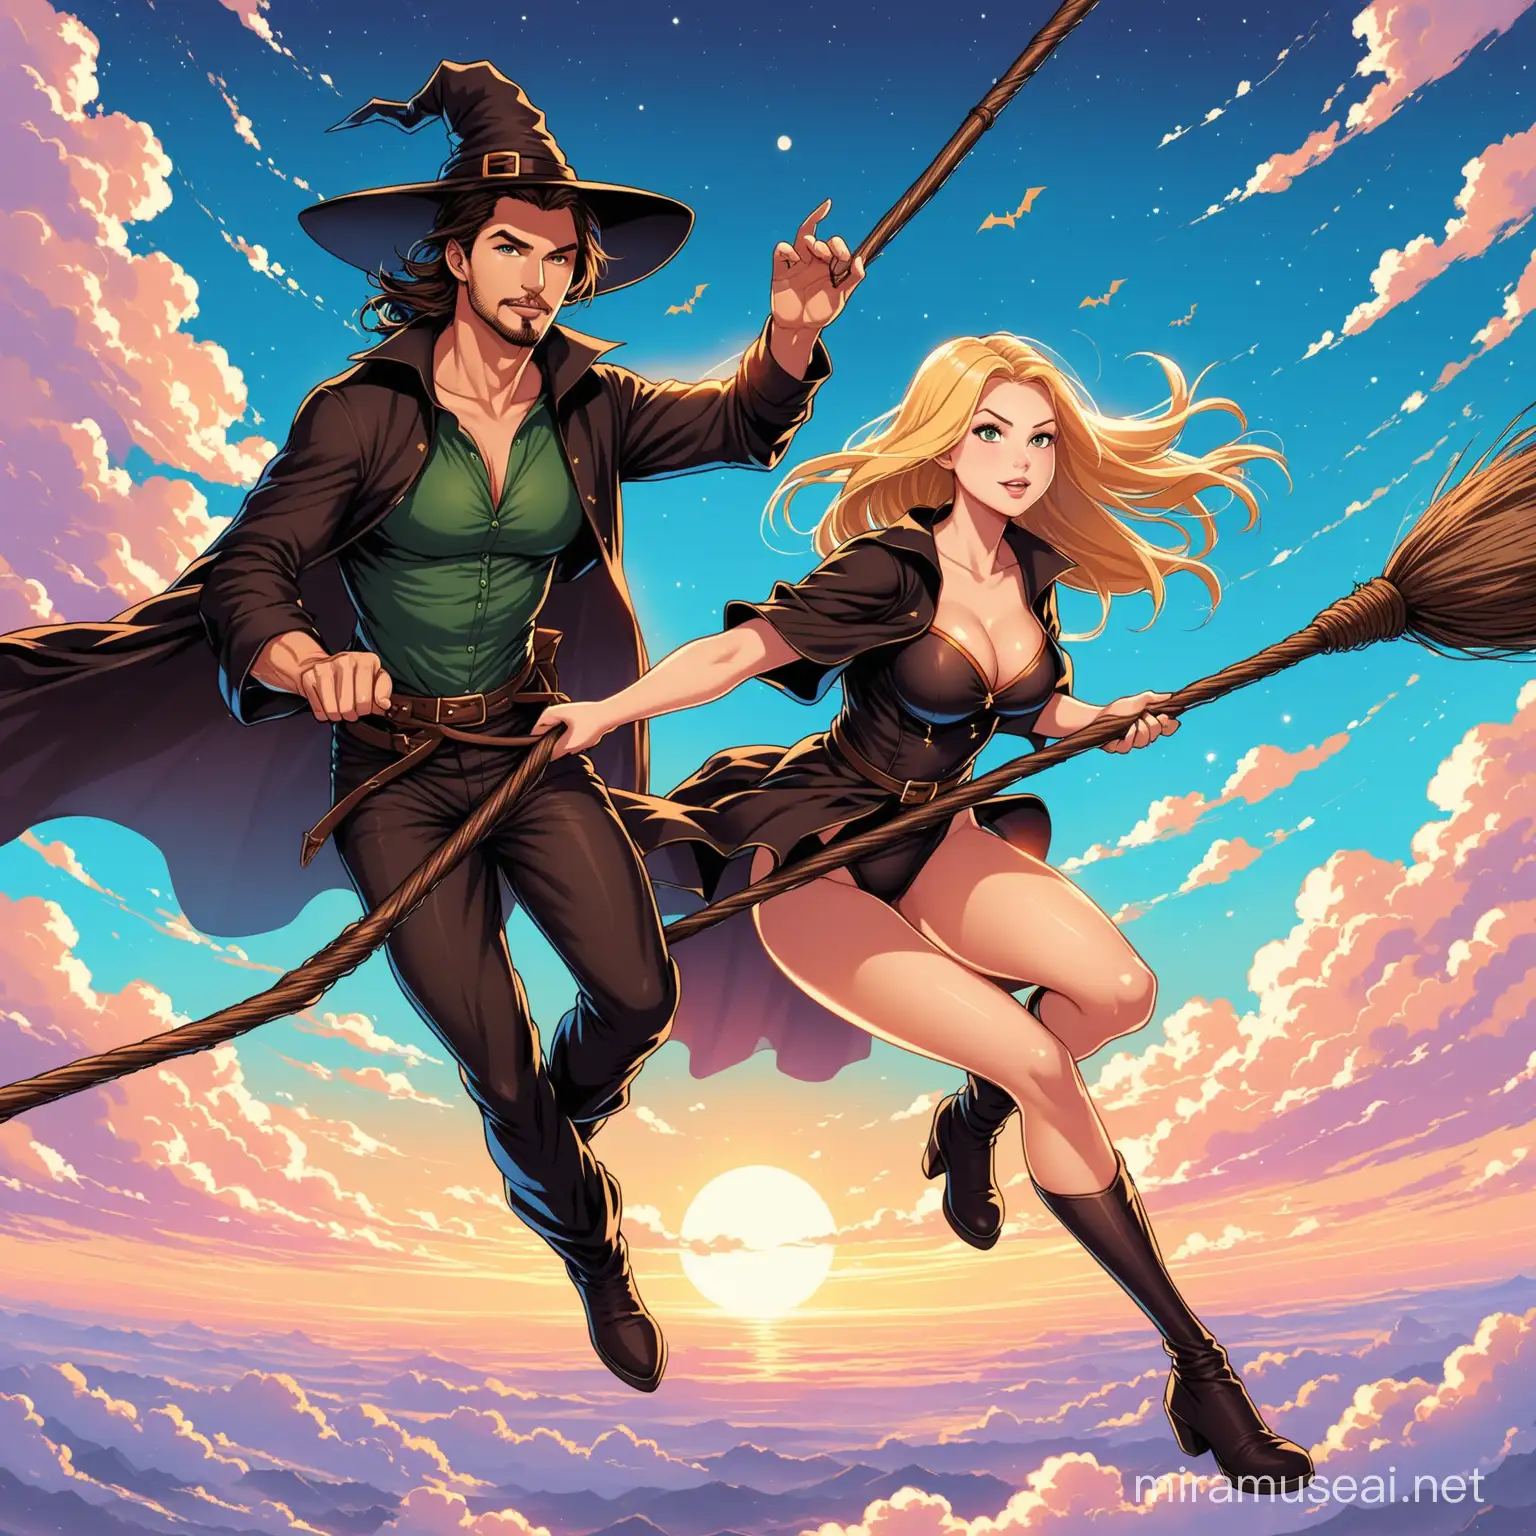 blonde sexy woman witch flies her broomstick across the sky with a handsome brunette man behind her